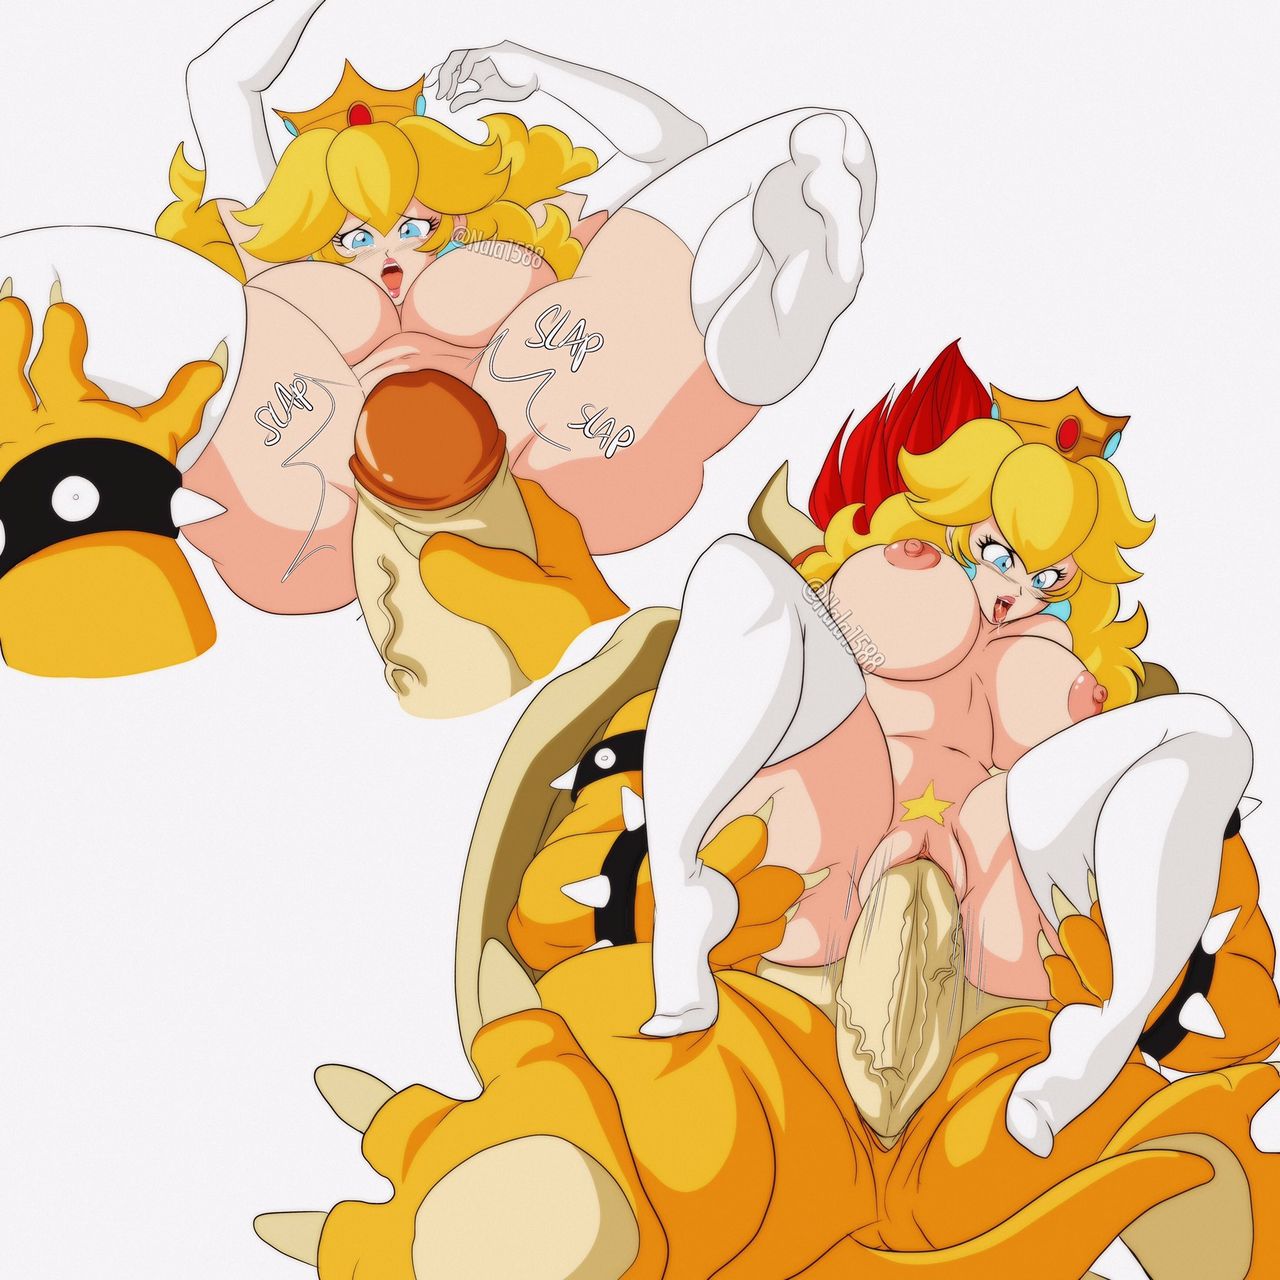 Mario x bowser porn - Best adult videos and photos